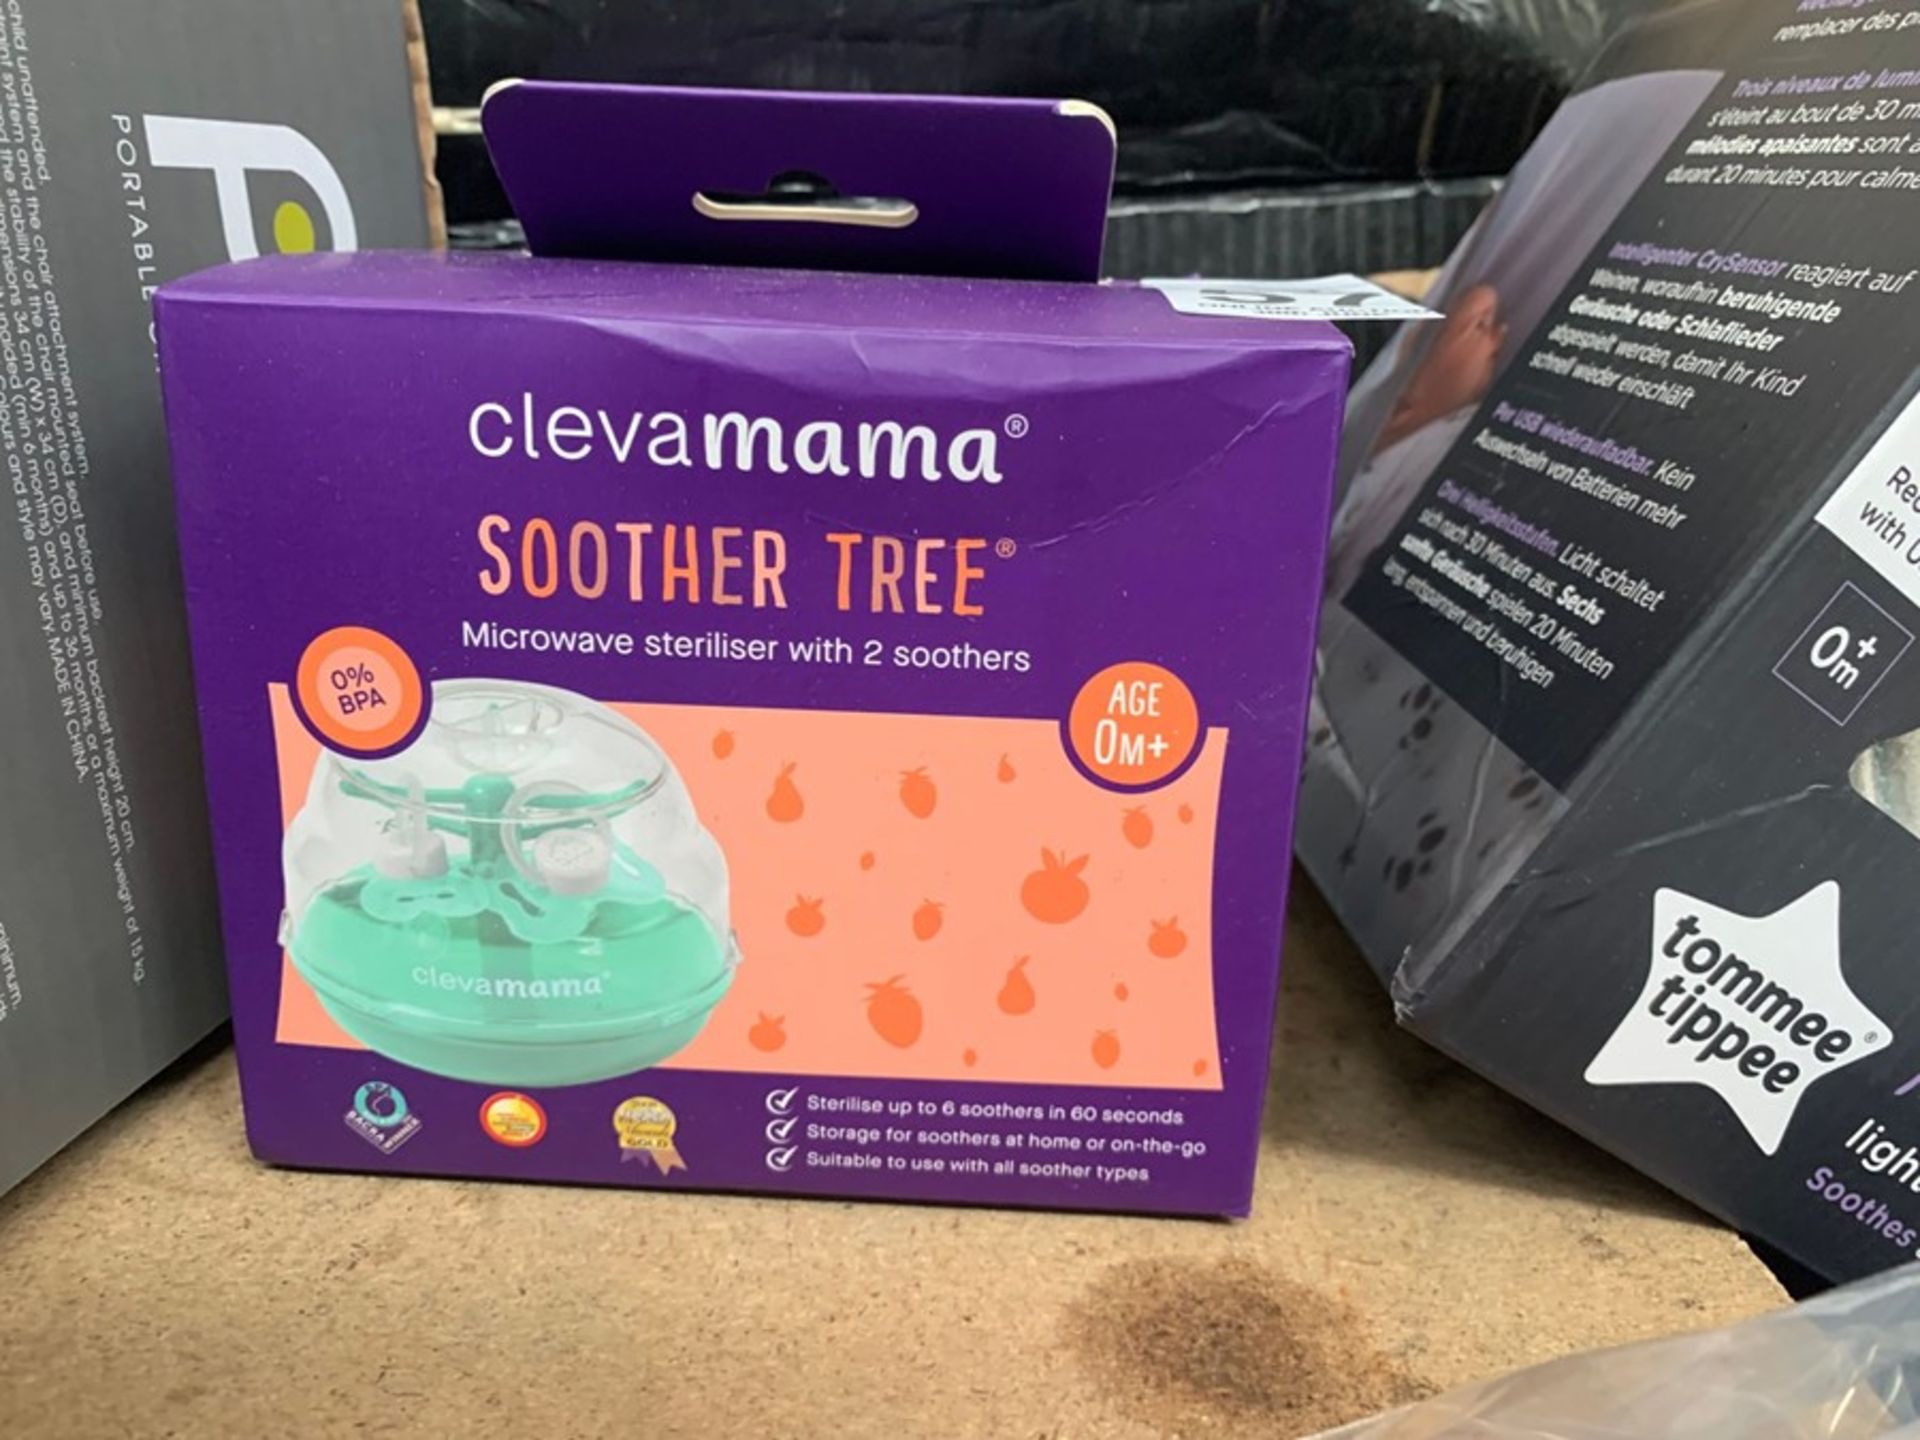 CLEVAMAMA SOOTHER TREE MICROWAVE STERILISER WITH SOOTHER